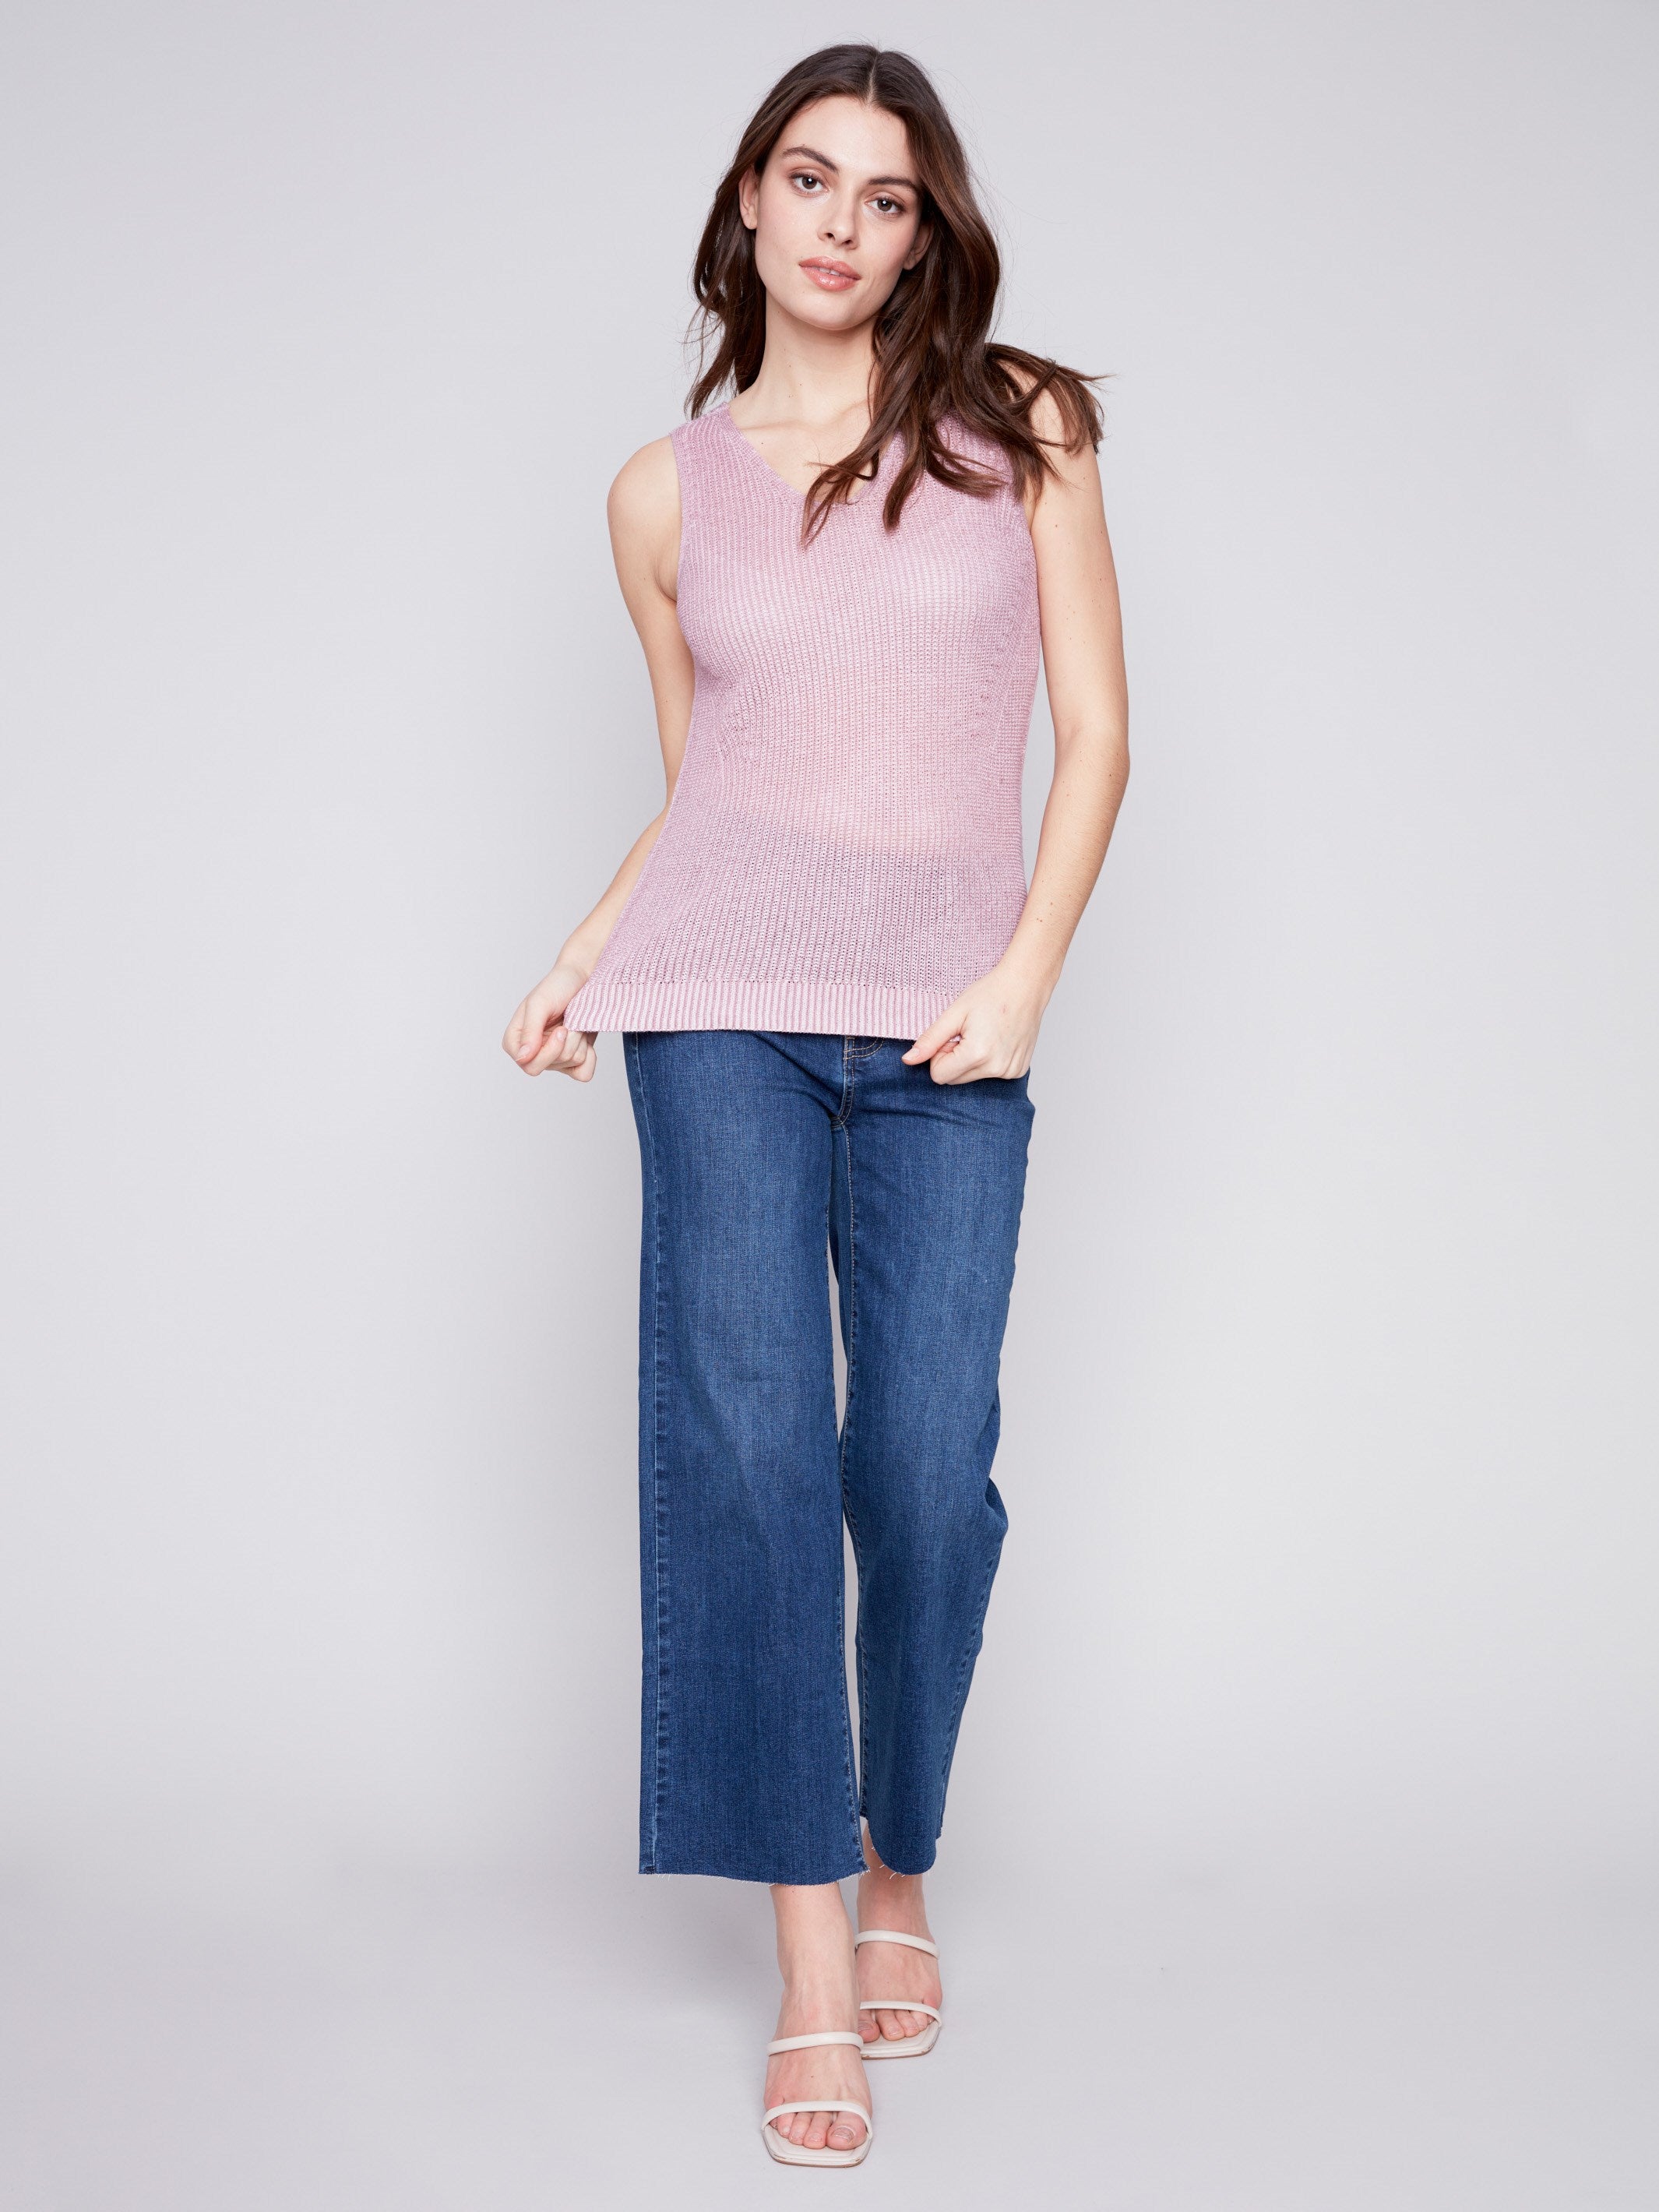 Cold-Dye Knit Cami - Dusty Rose - Charlie B Collection Canada - Image 3